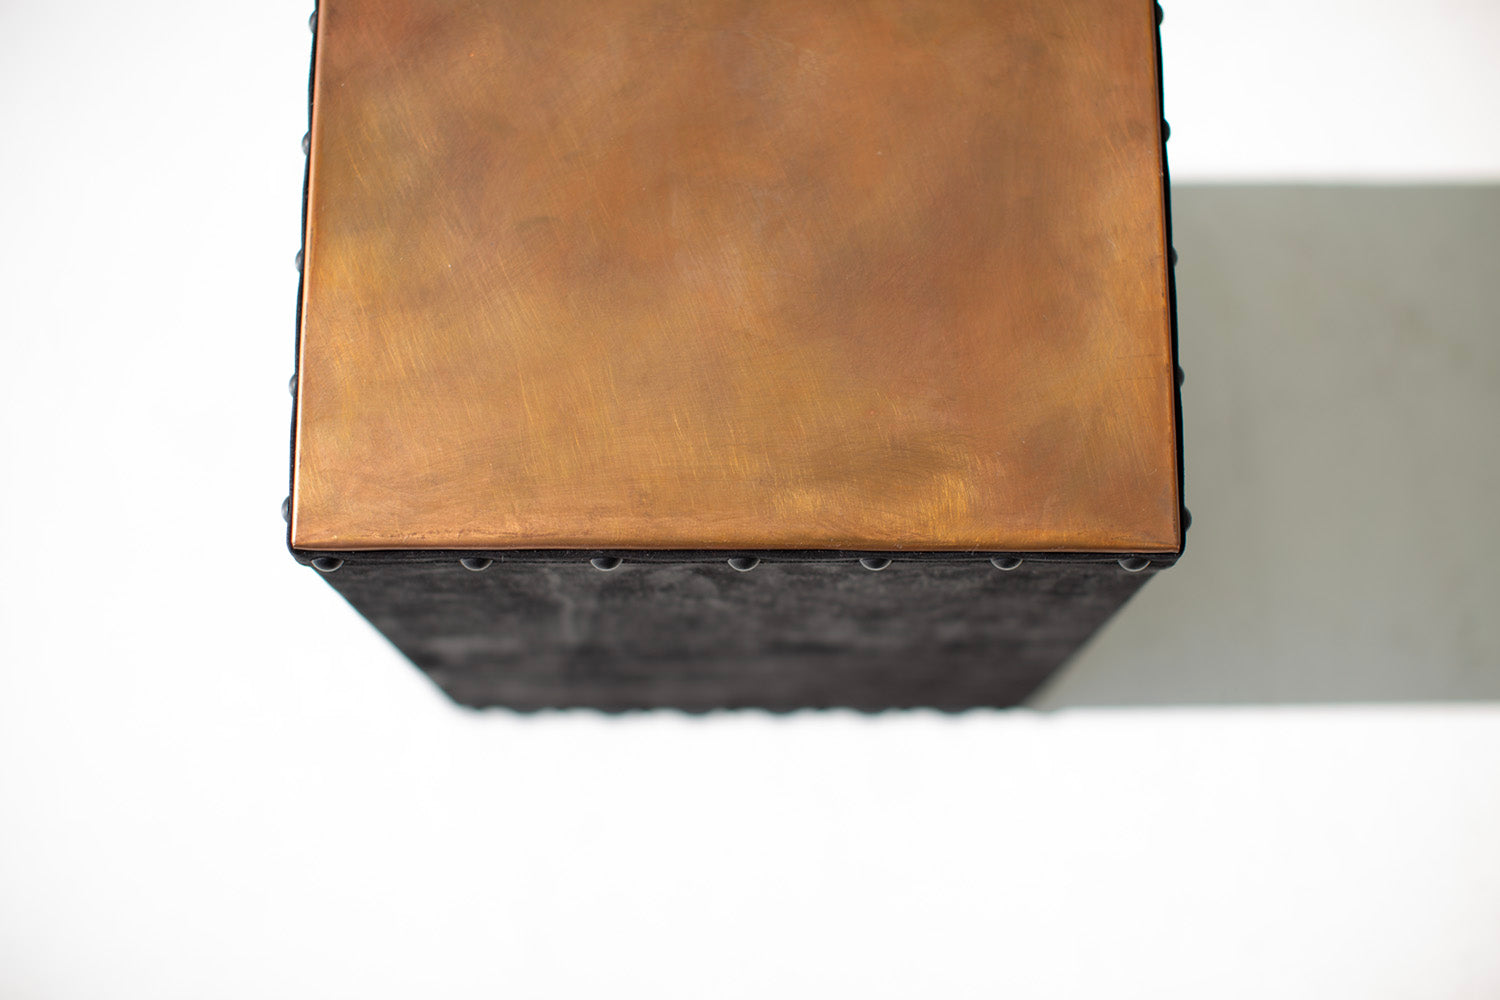           cawtaba-modern-leather-and-copper-side-tables-2312-05